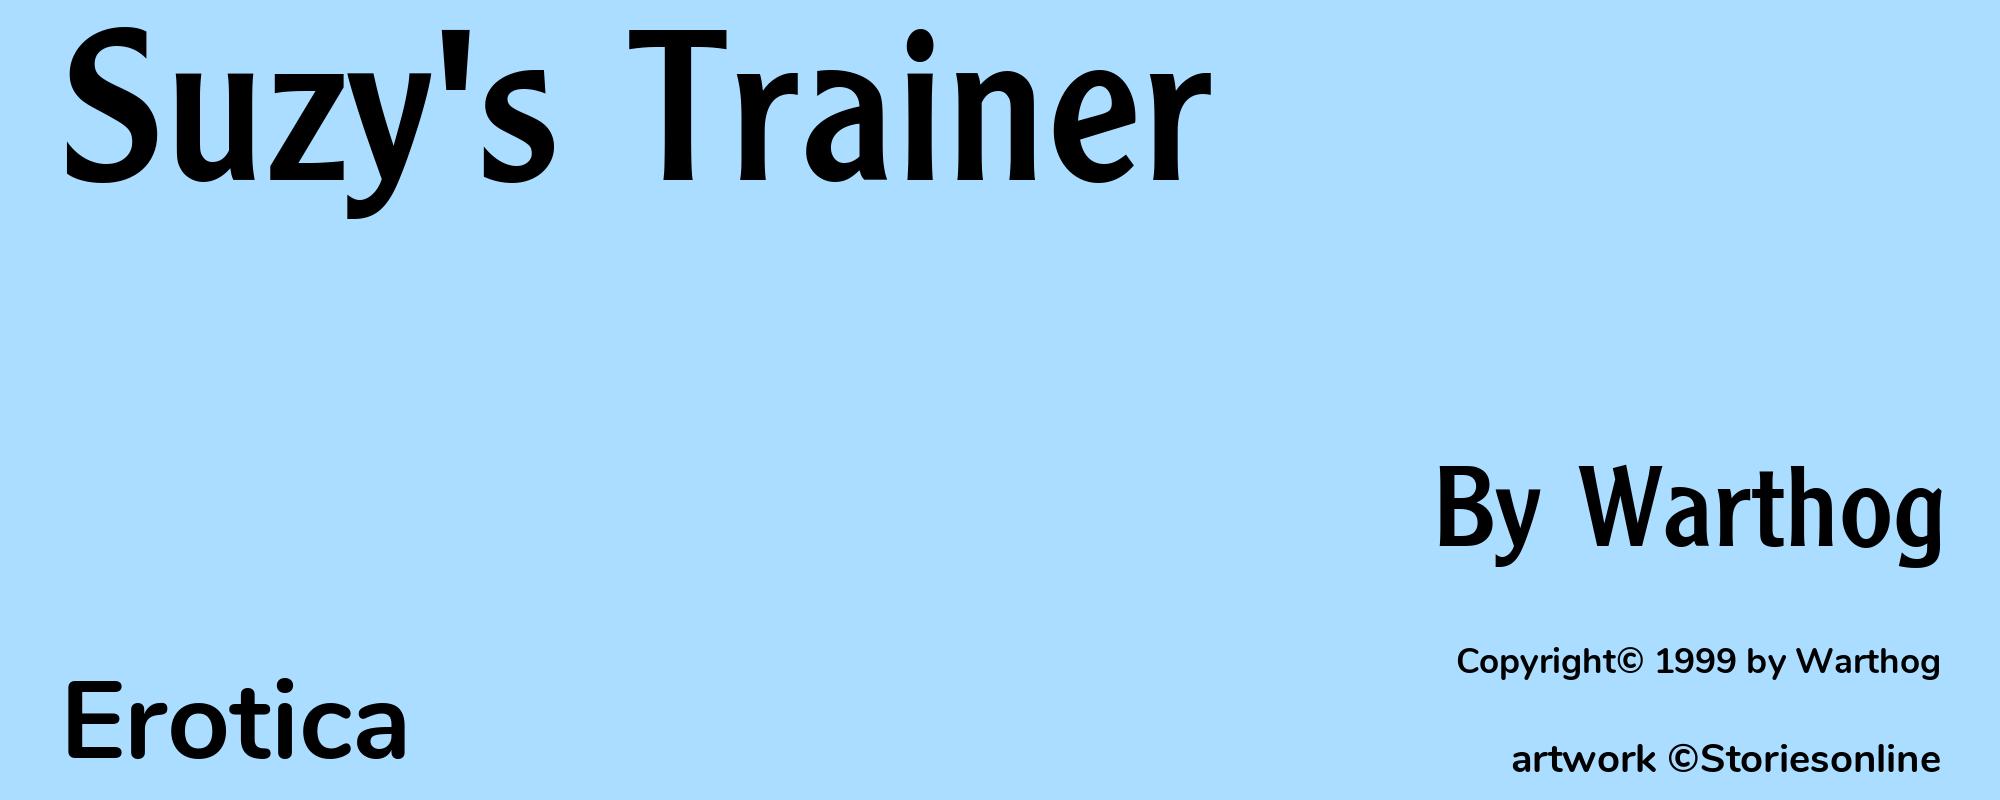 Suzy's Trainer - Cover